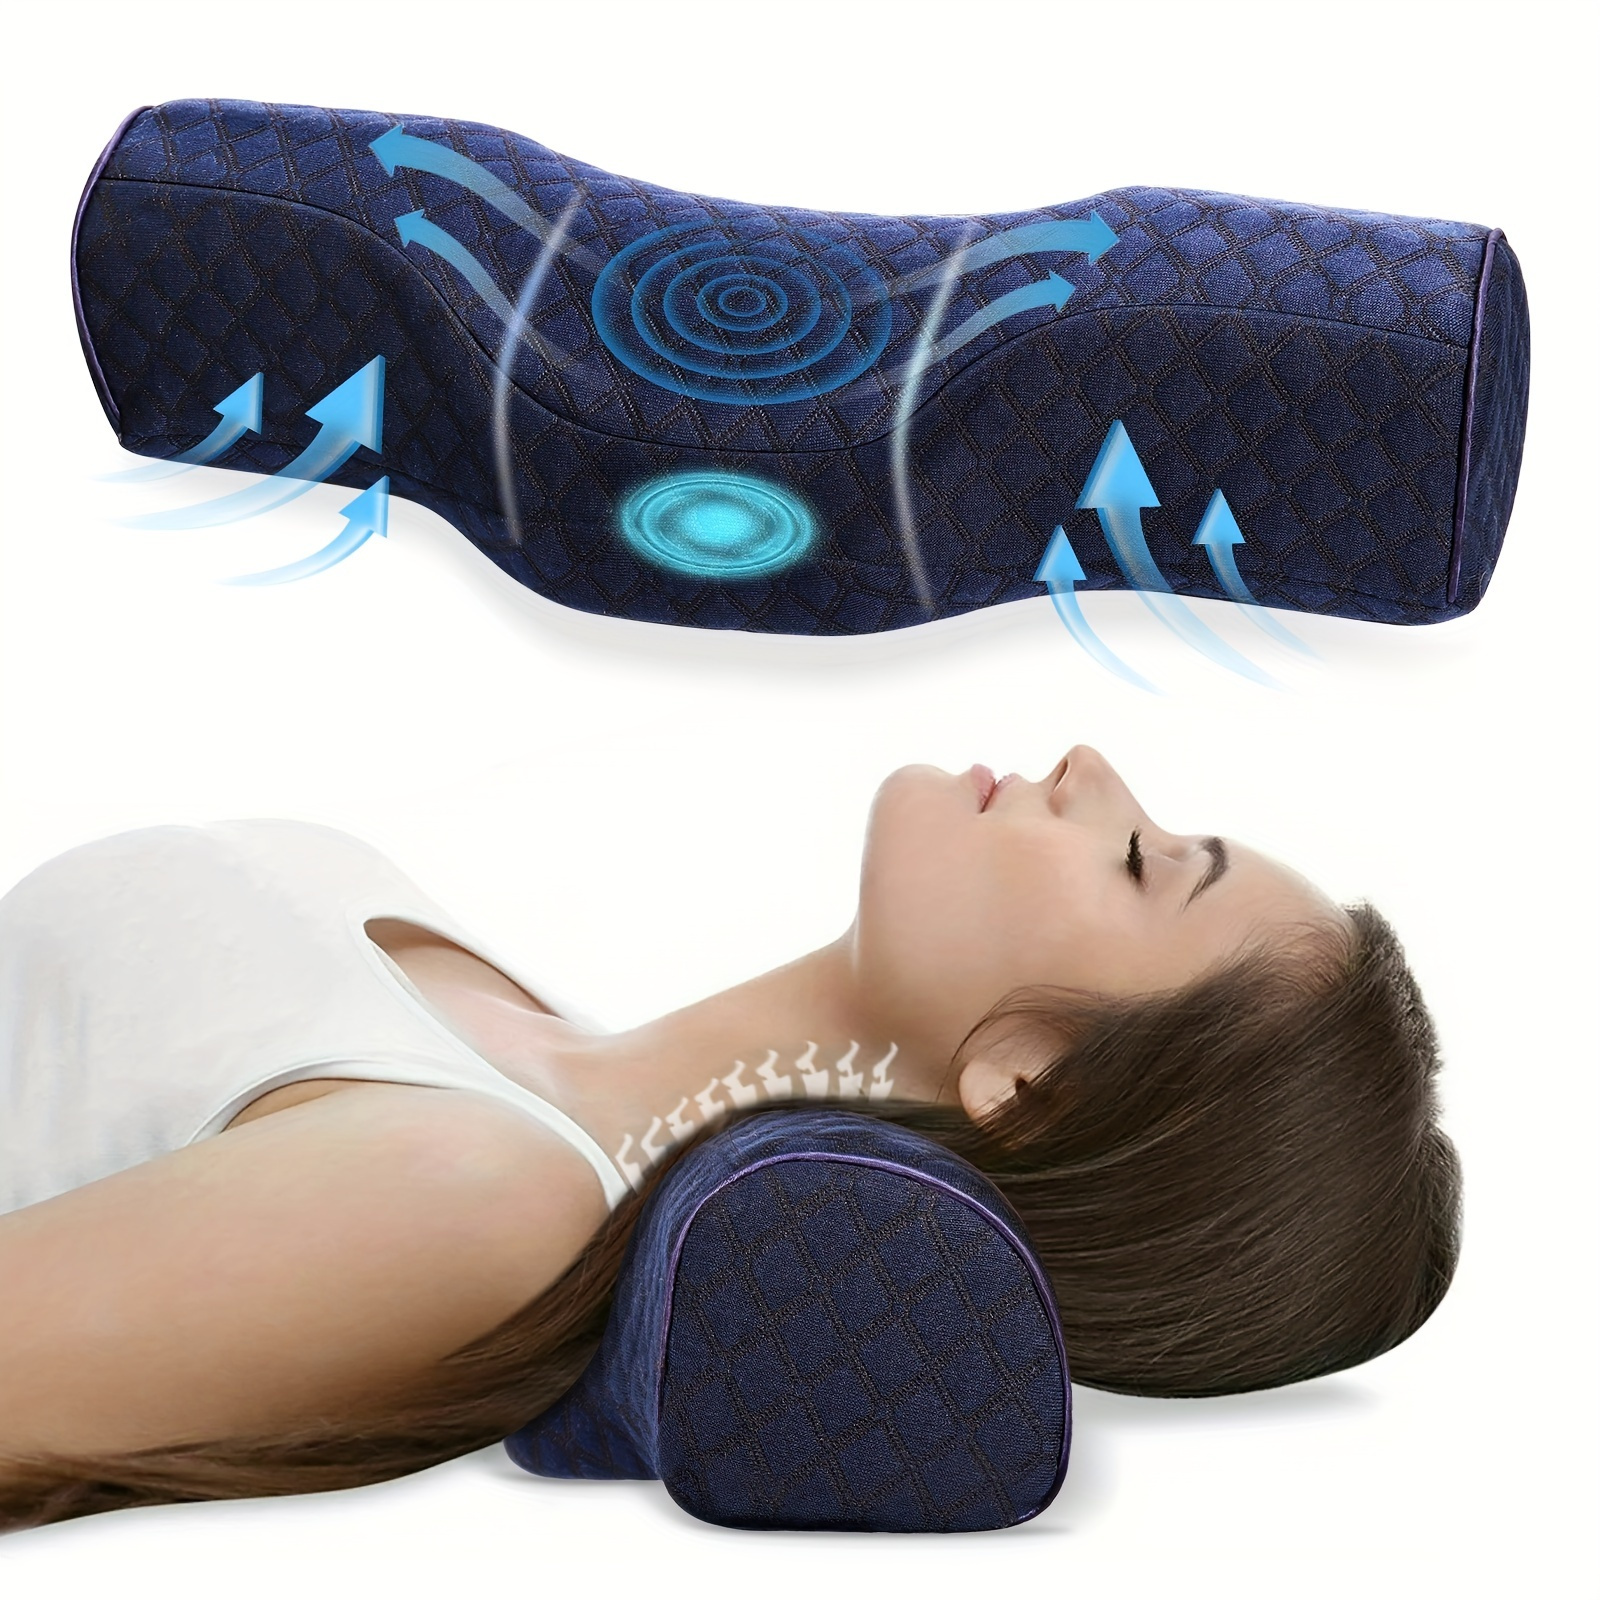 

1pc Cervical Memory Foam Pillow Neck & Cervical Pillow For Neck Relax, Ergonomic Neck Support Pillow For Side, Back And Stomach Sleepers With Breathable Pillowcase Bedding Supplies, Travel Pillow.